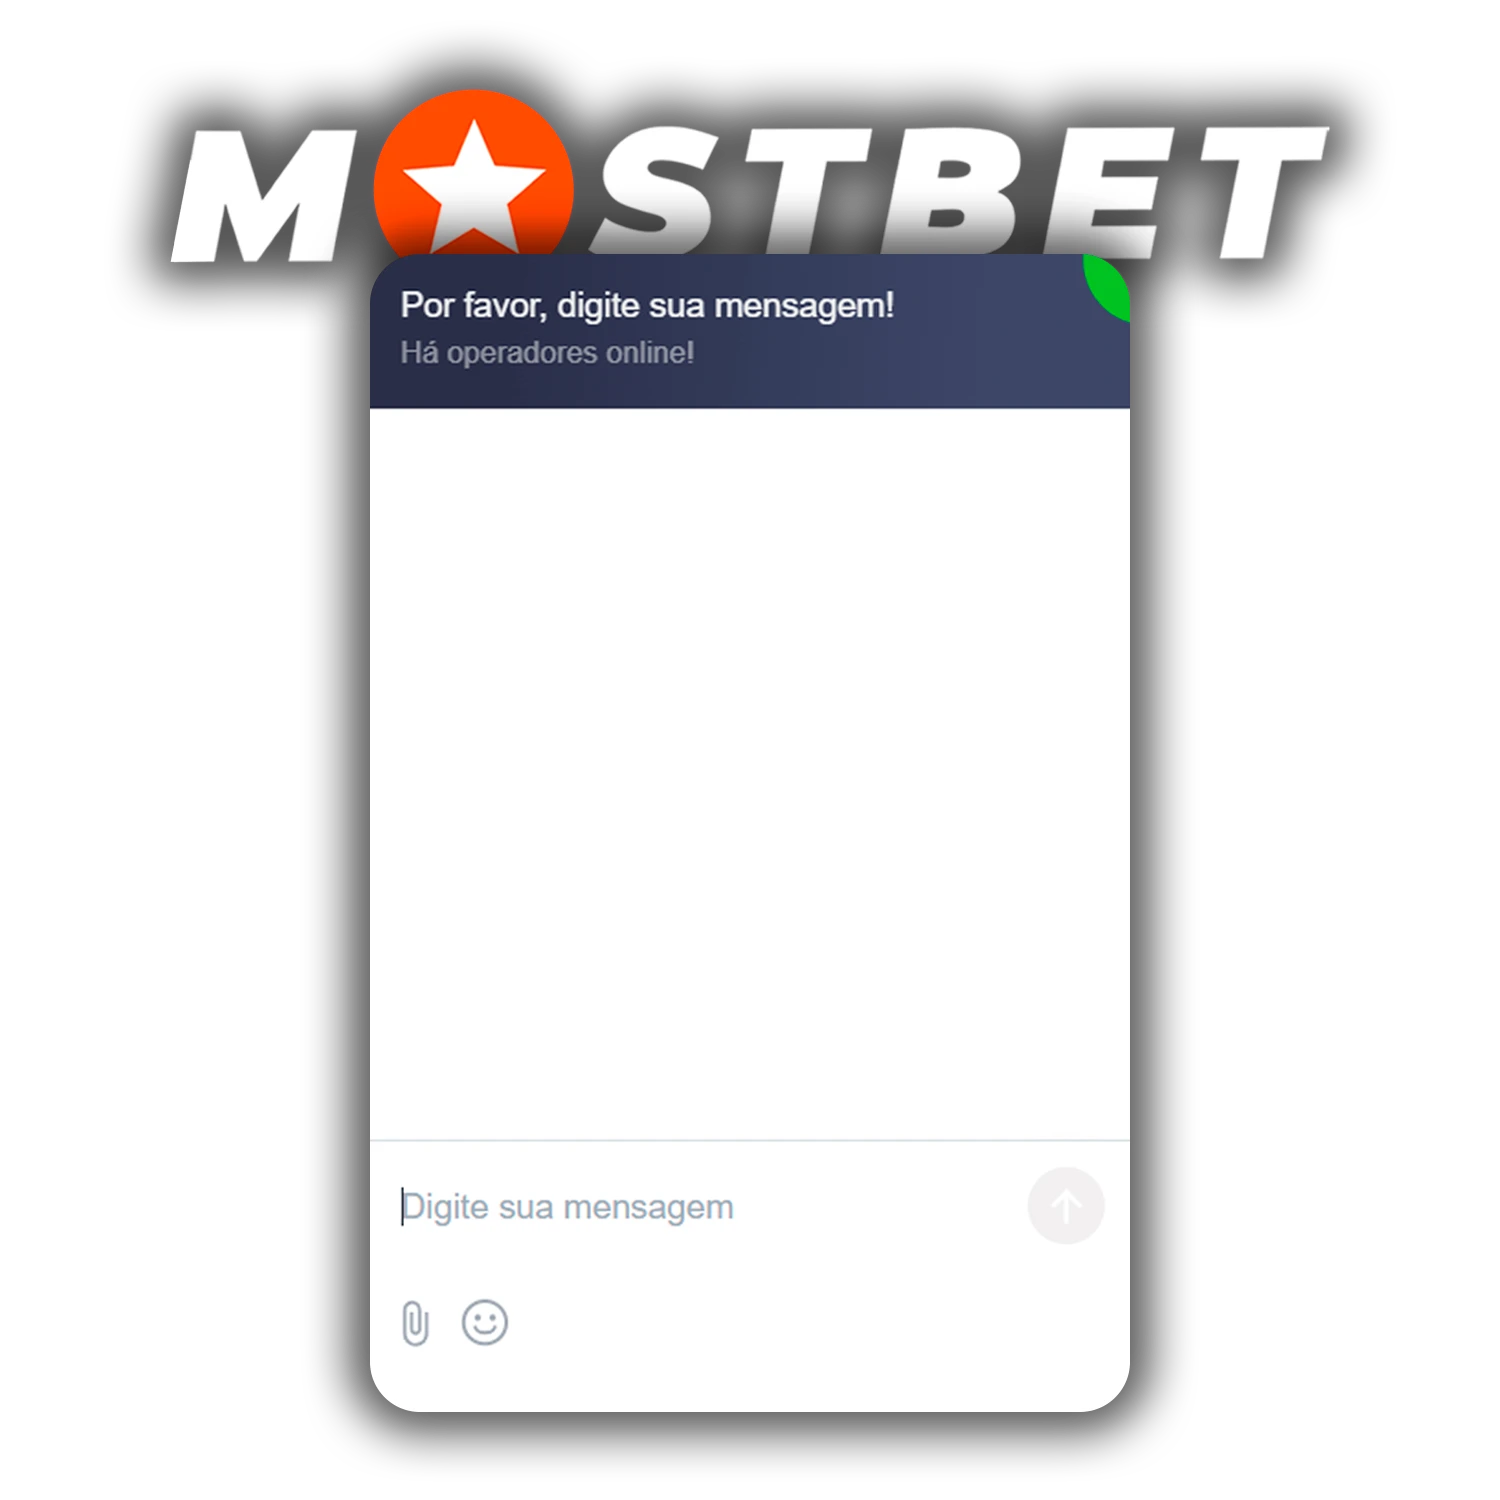 Find out how to request Mostbet customer support.